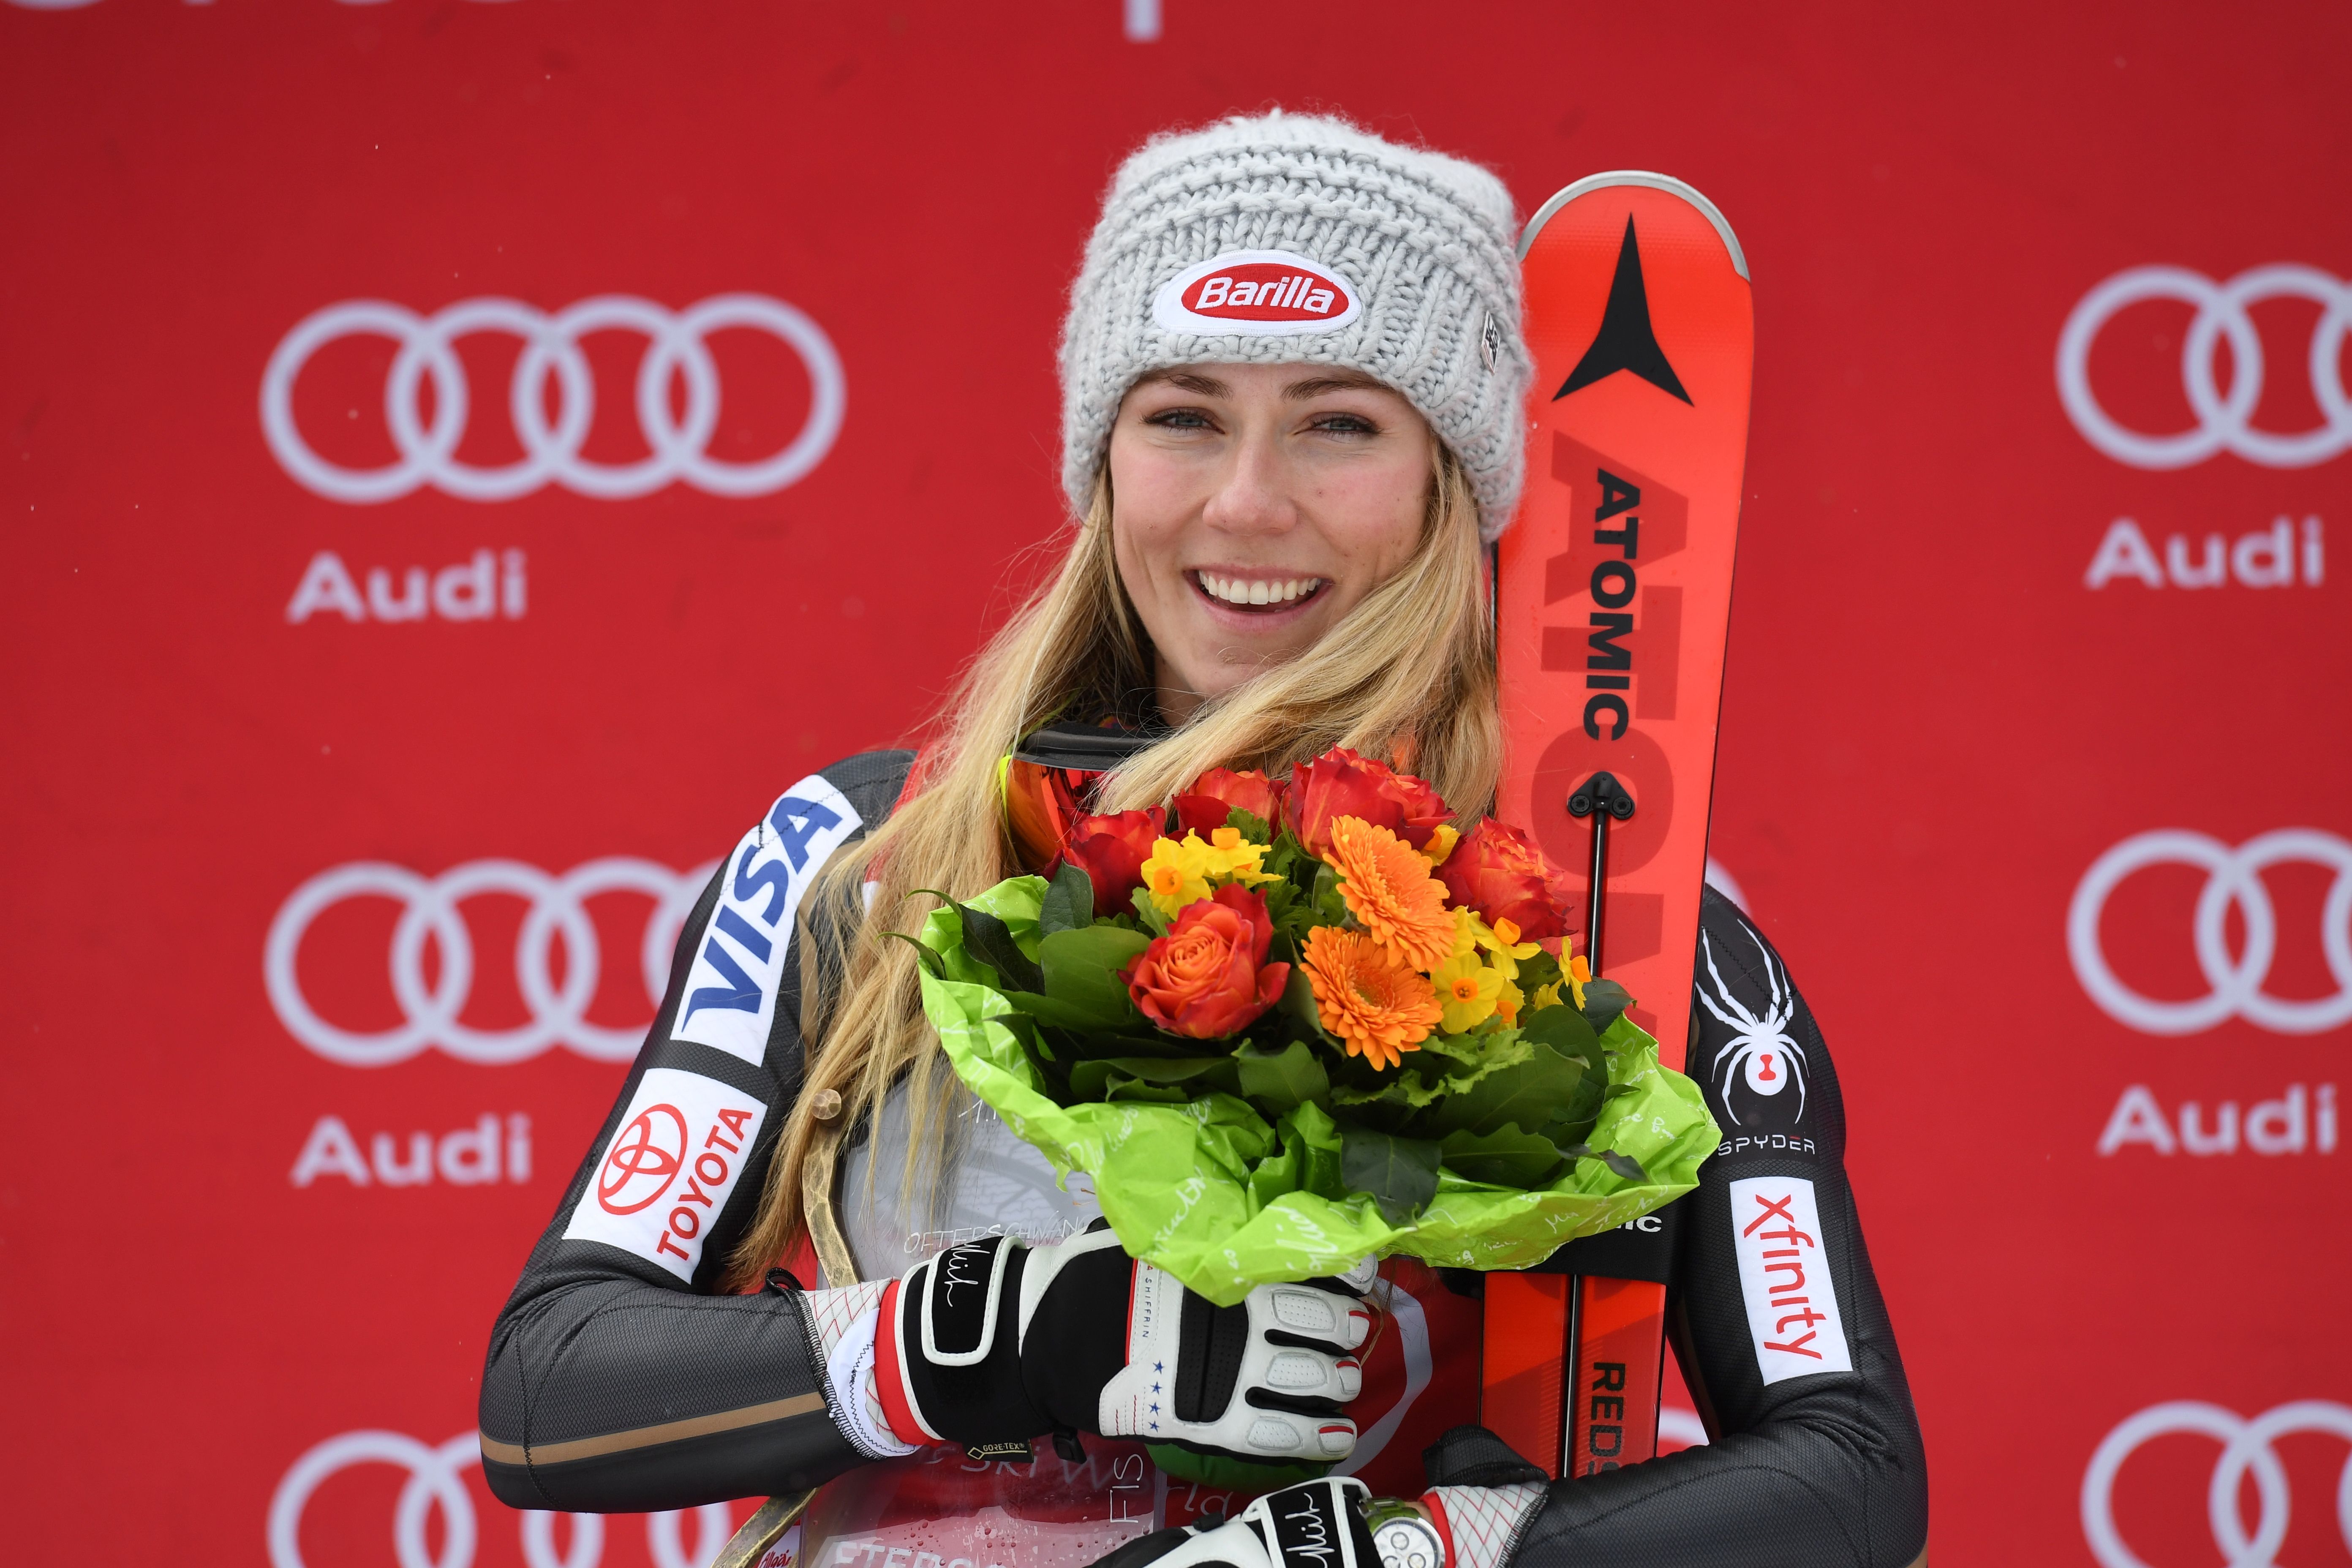 Mikaela Shiffrin Featured on Adweek Cover